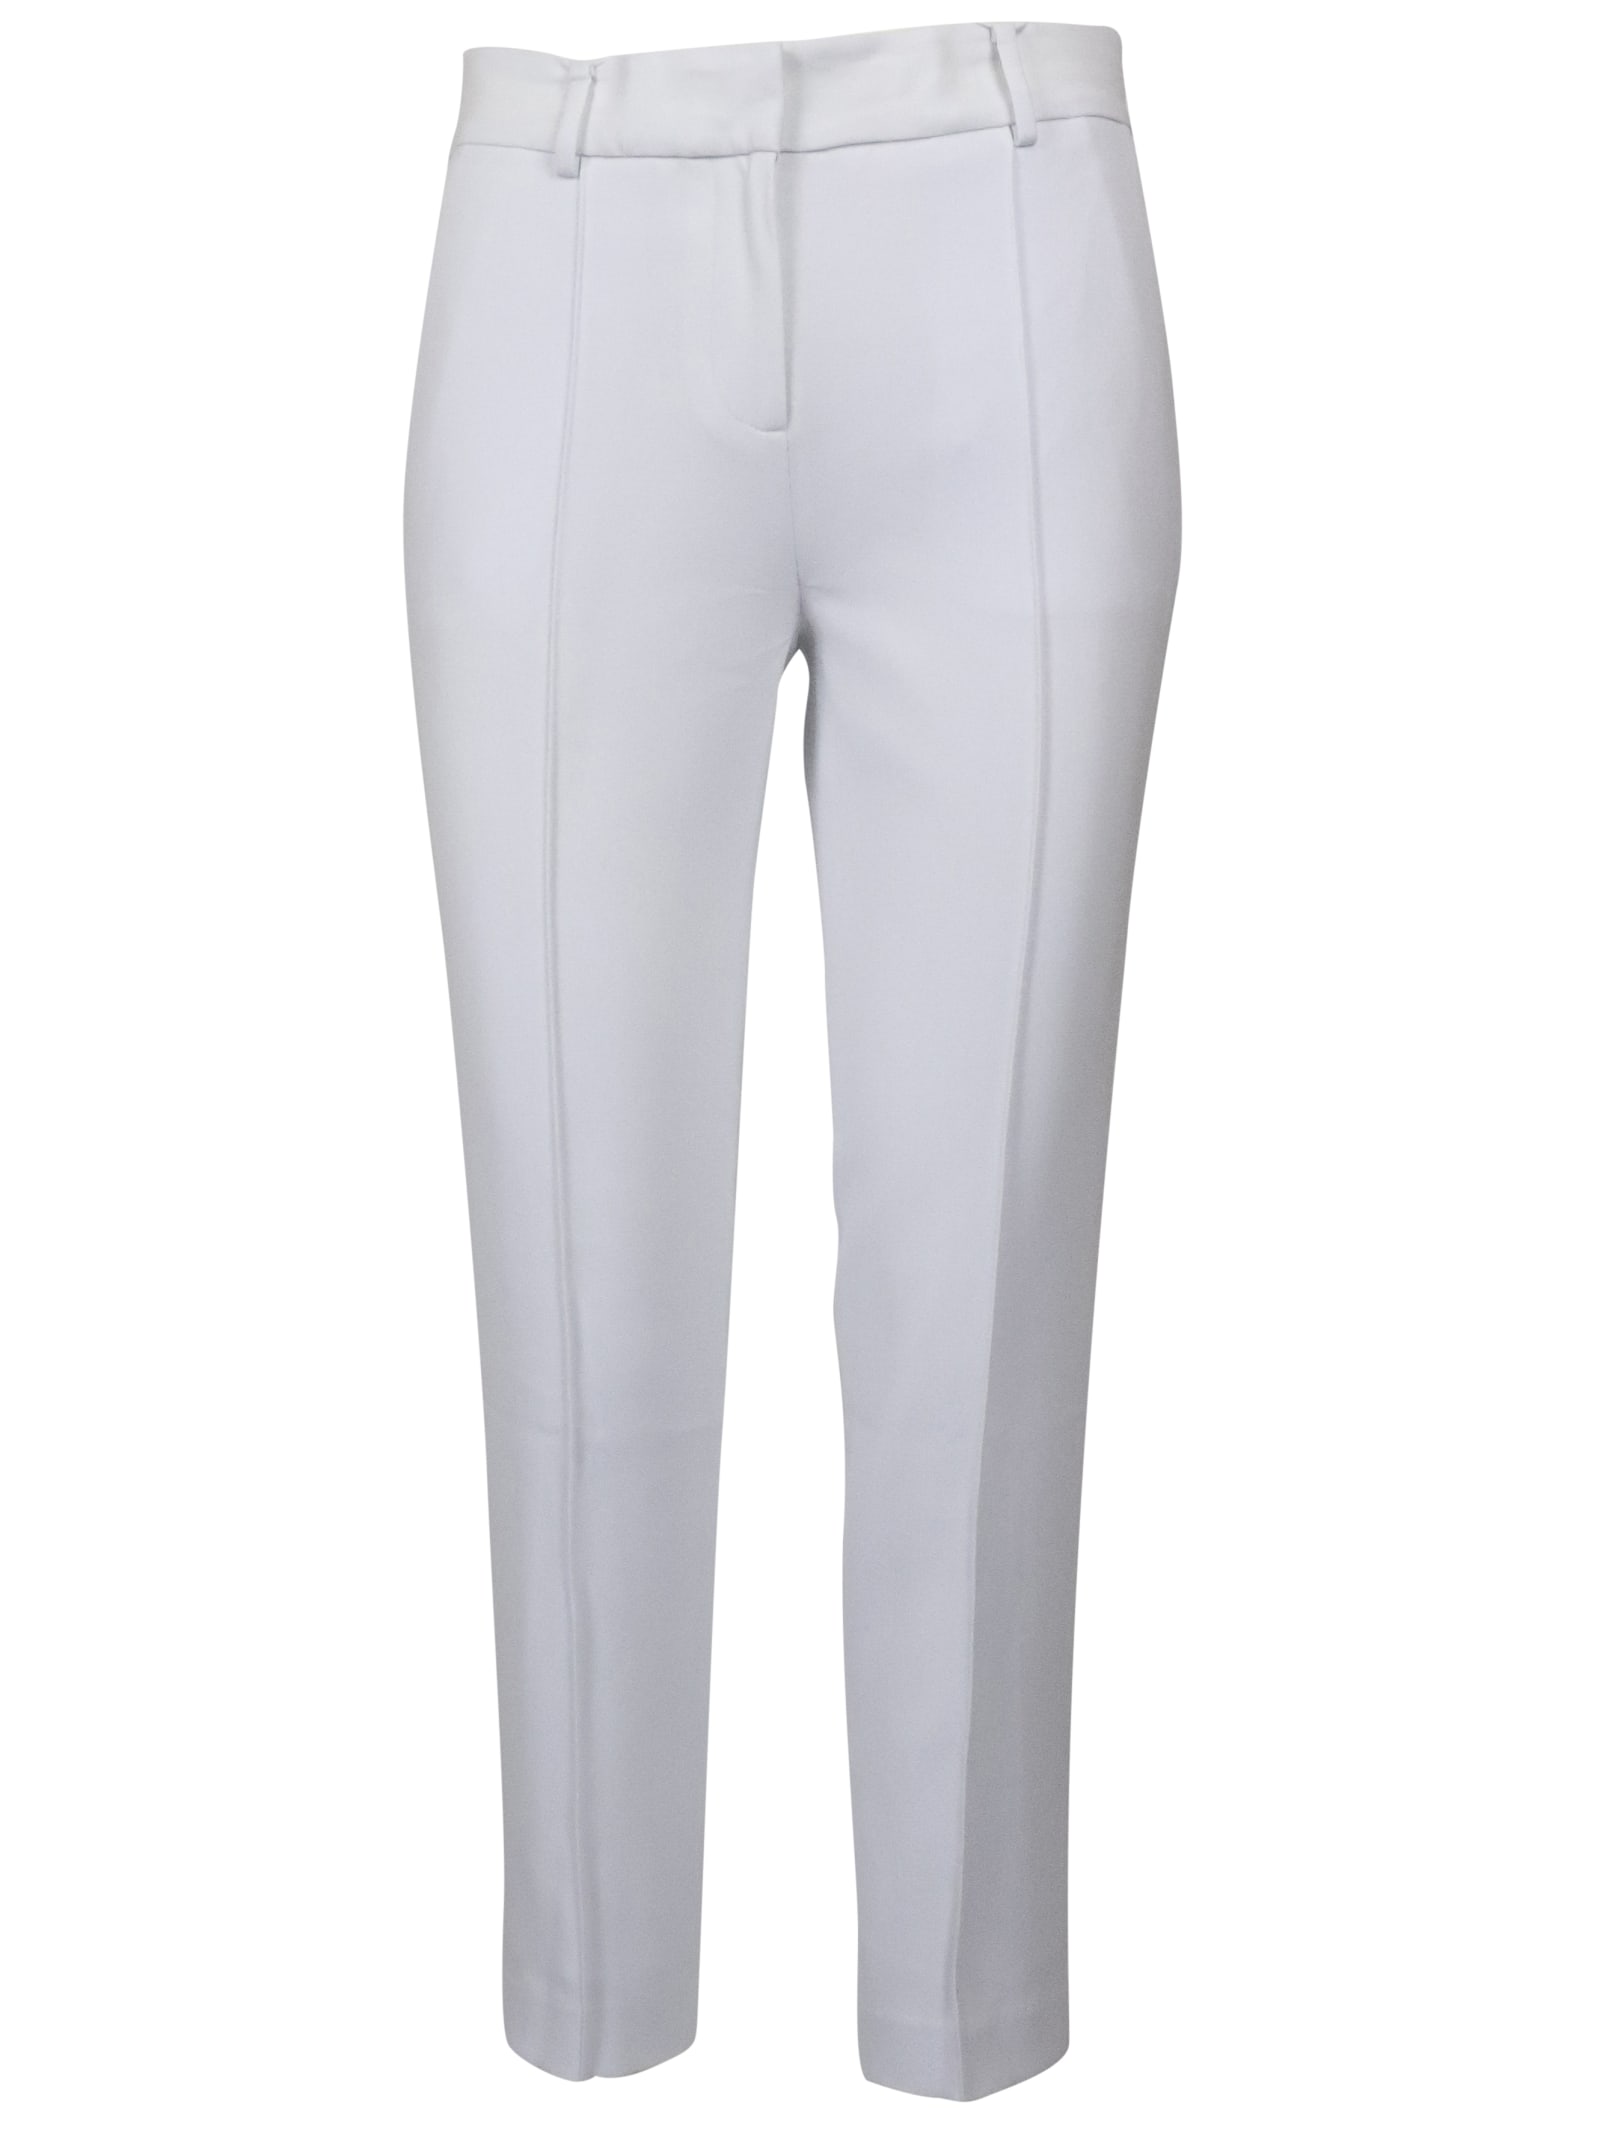 Michael Kors Crepe Compacty Trousers